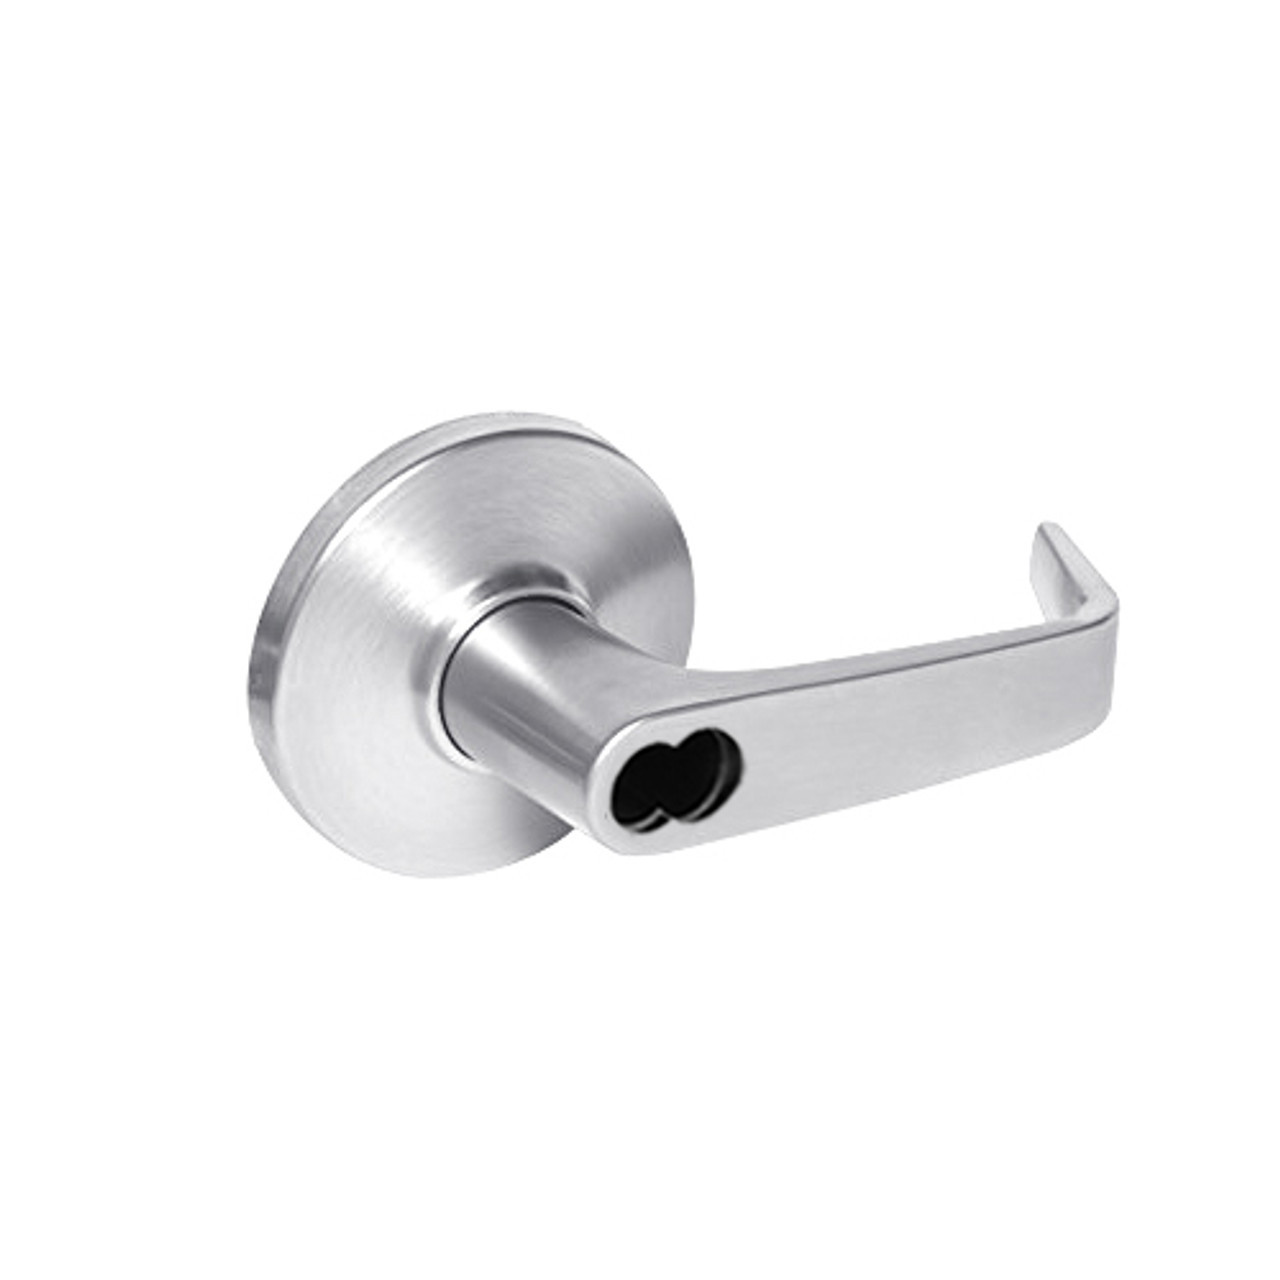 9K47E15DSTK625LM Best 9K Series Service Station Cylindrical Lever Locks with Contour Angle with Return Lever Design Accept 7 Pin Best Core in Bright Chrome